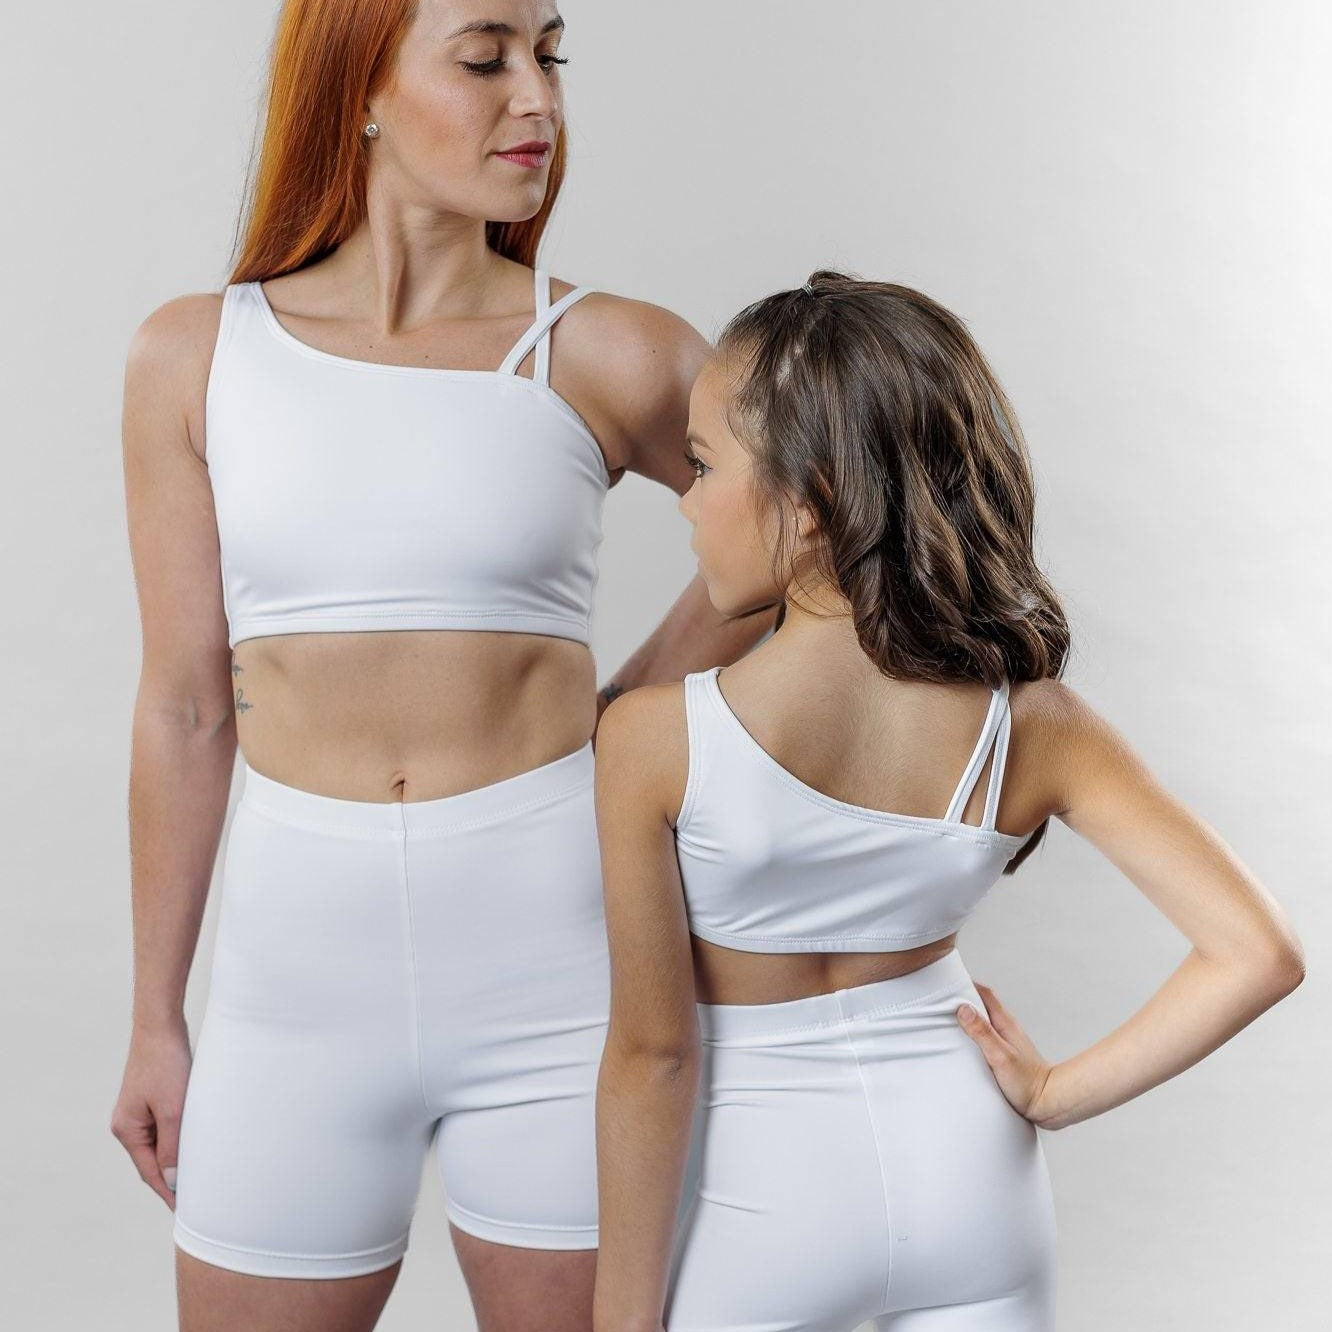 Ultra top by BLU for active women and kids by Opra Dancewear